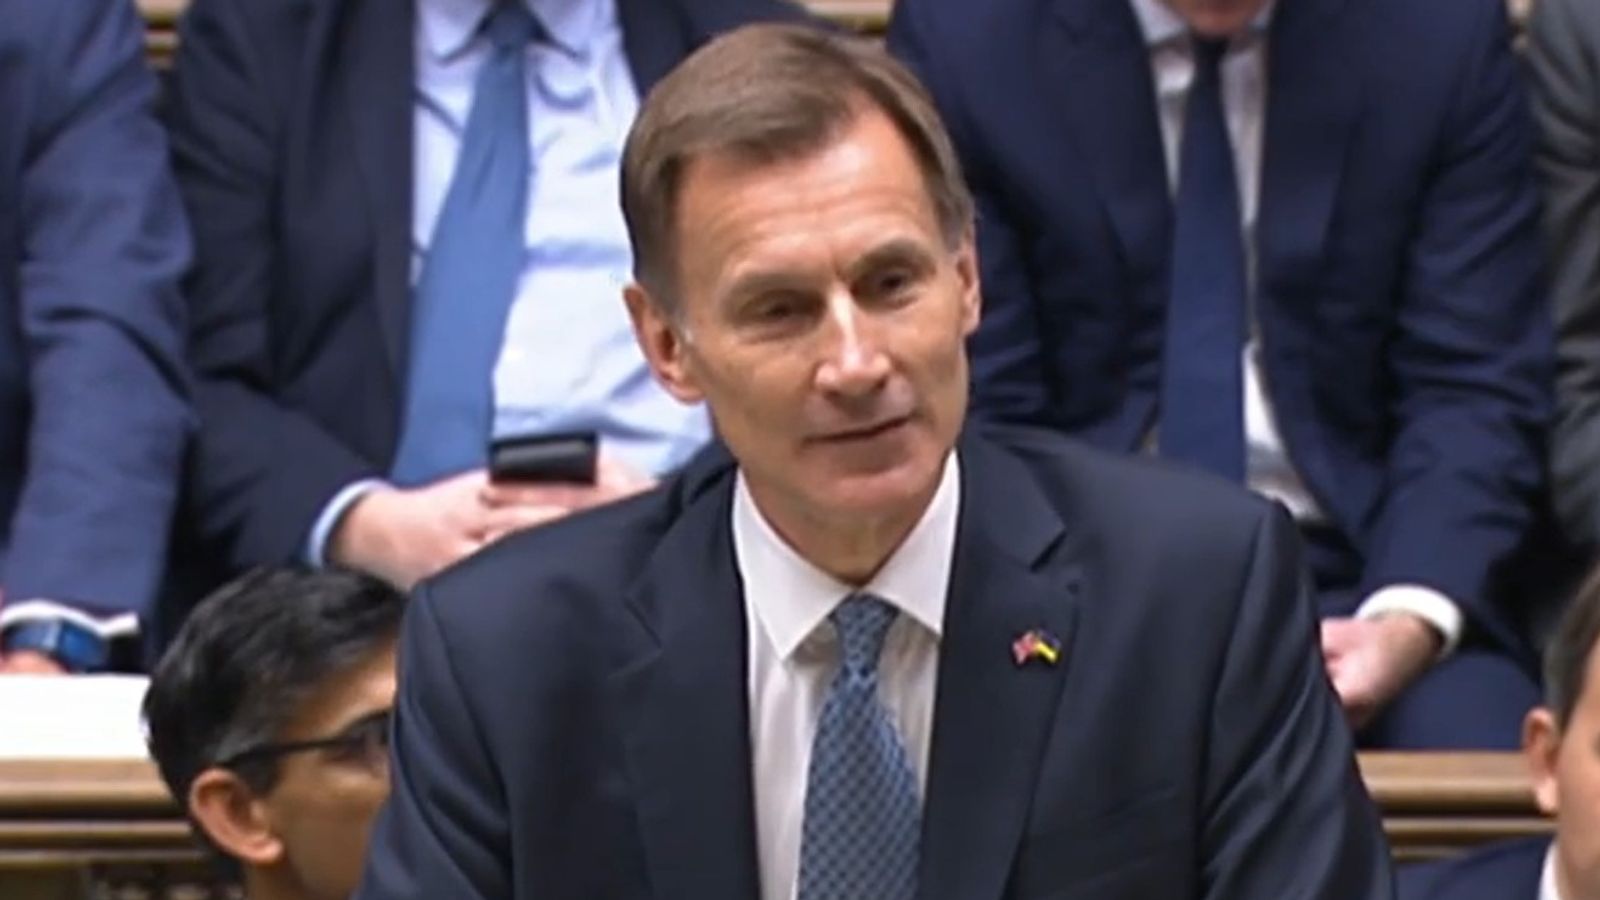 Jeremy Hunt offers hope on pay settlements but rules out feeding inflation